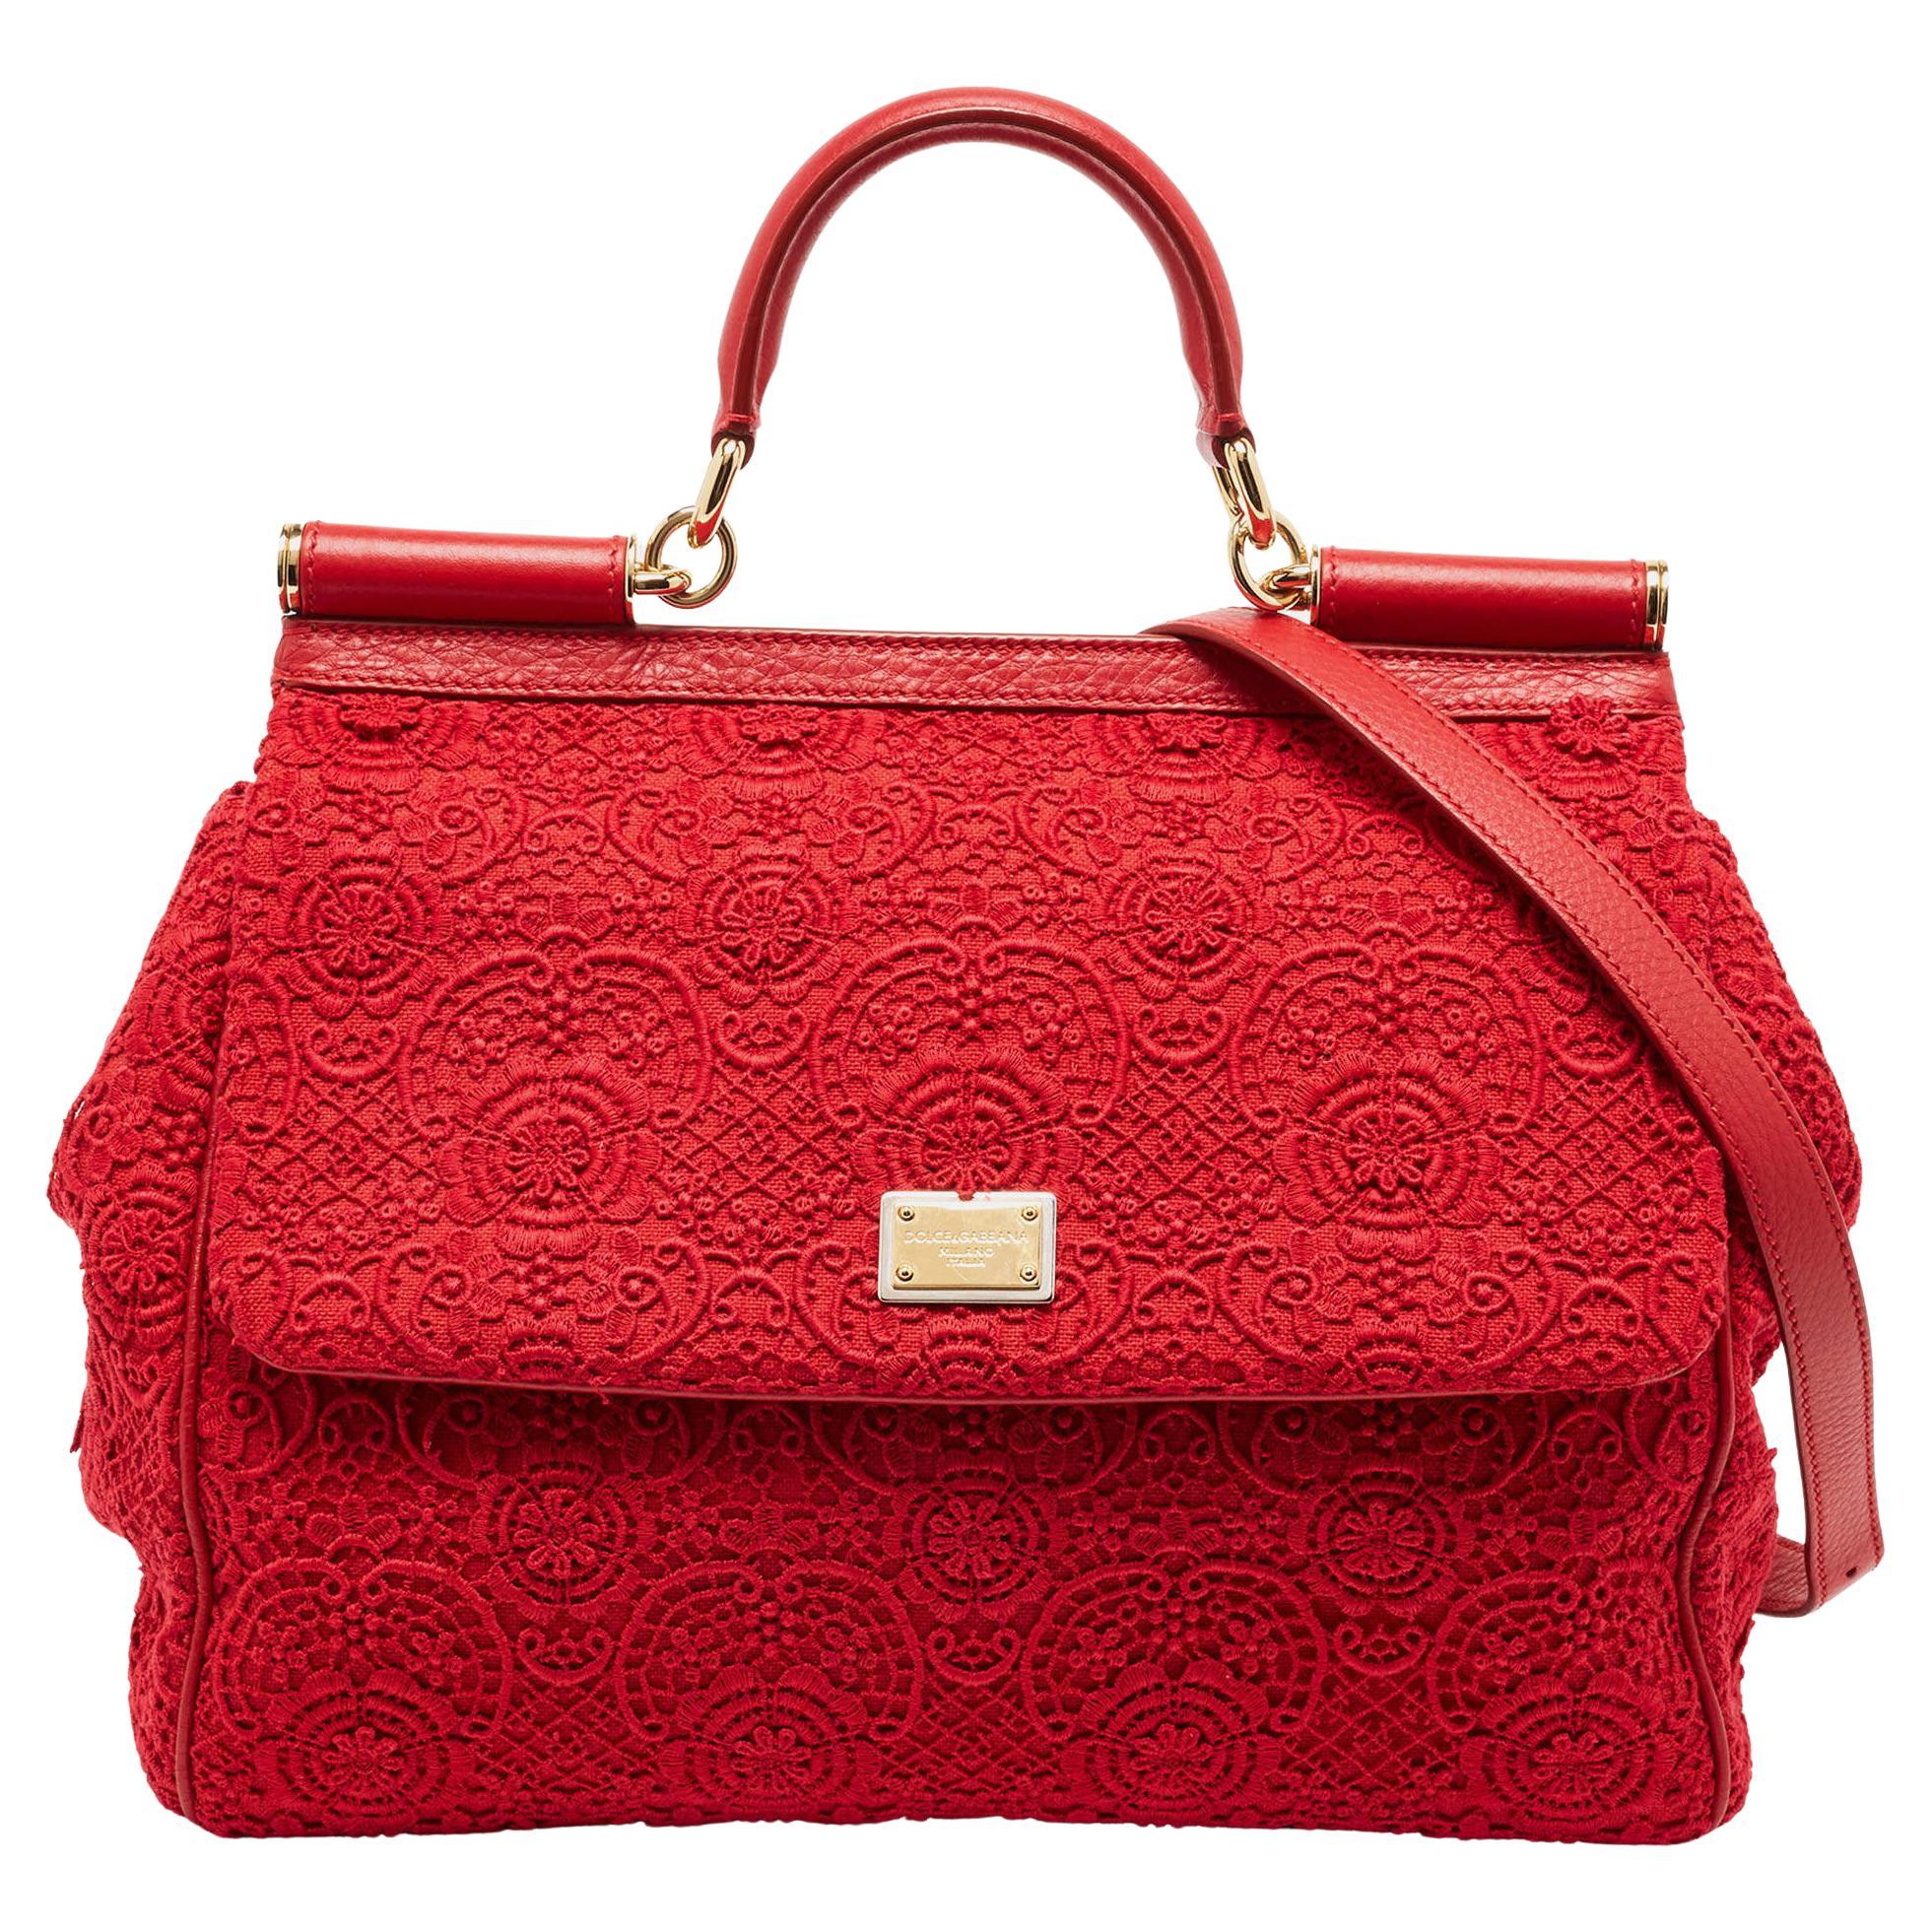 Dolce & Gabbana Red Lace and Leather Large Miss Sicily Top Handle Bag